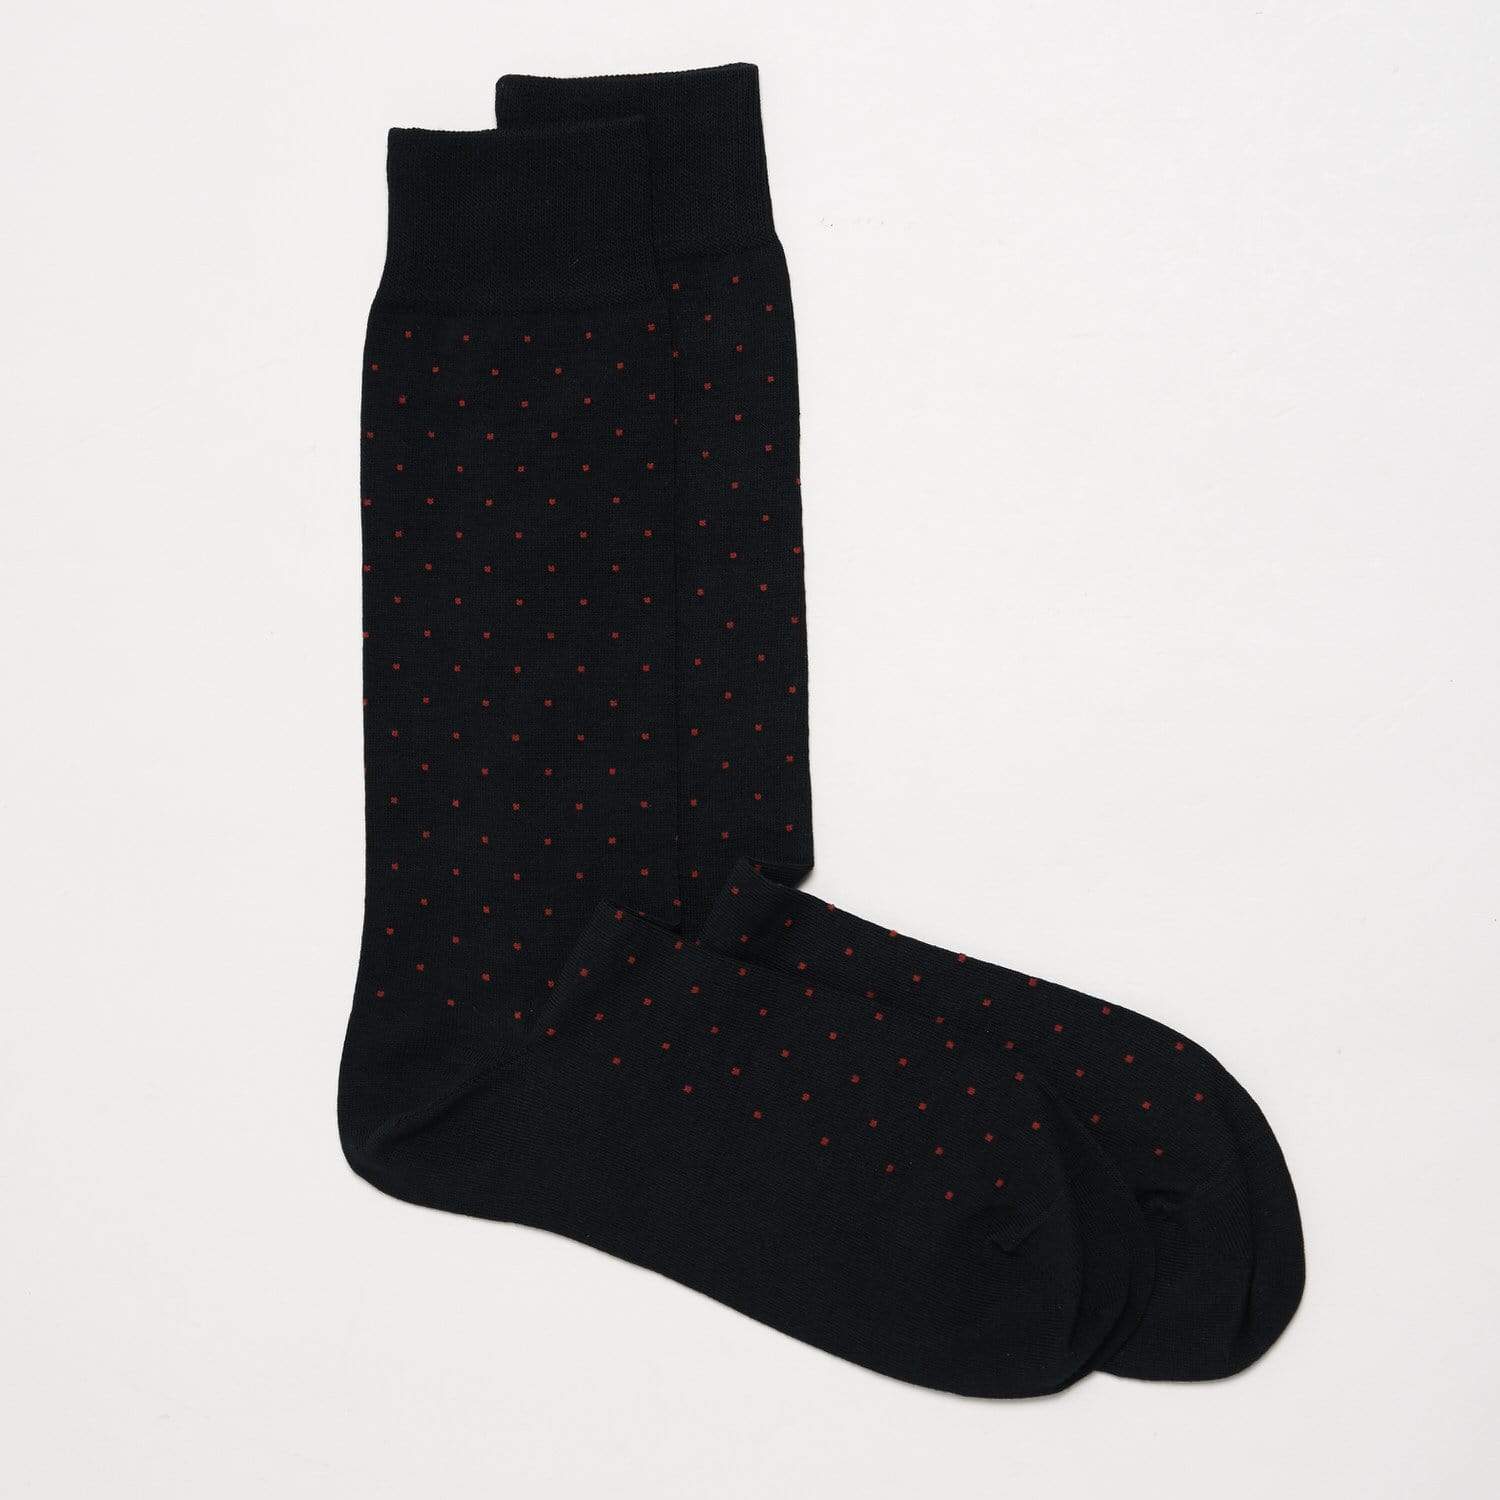 T.M.Lewin-Dot-Patterned-Socks-Navy-and-Red-61469-008